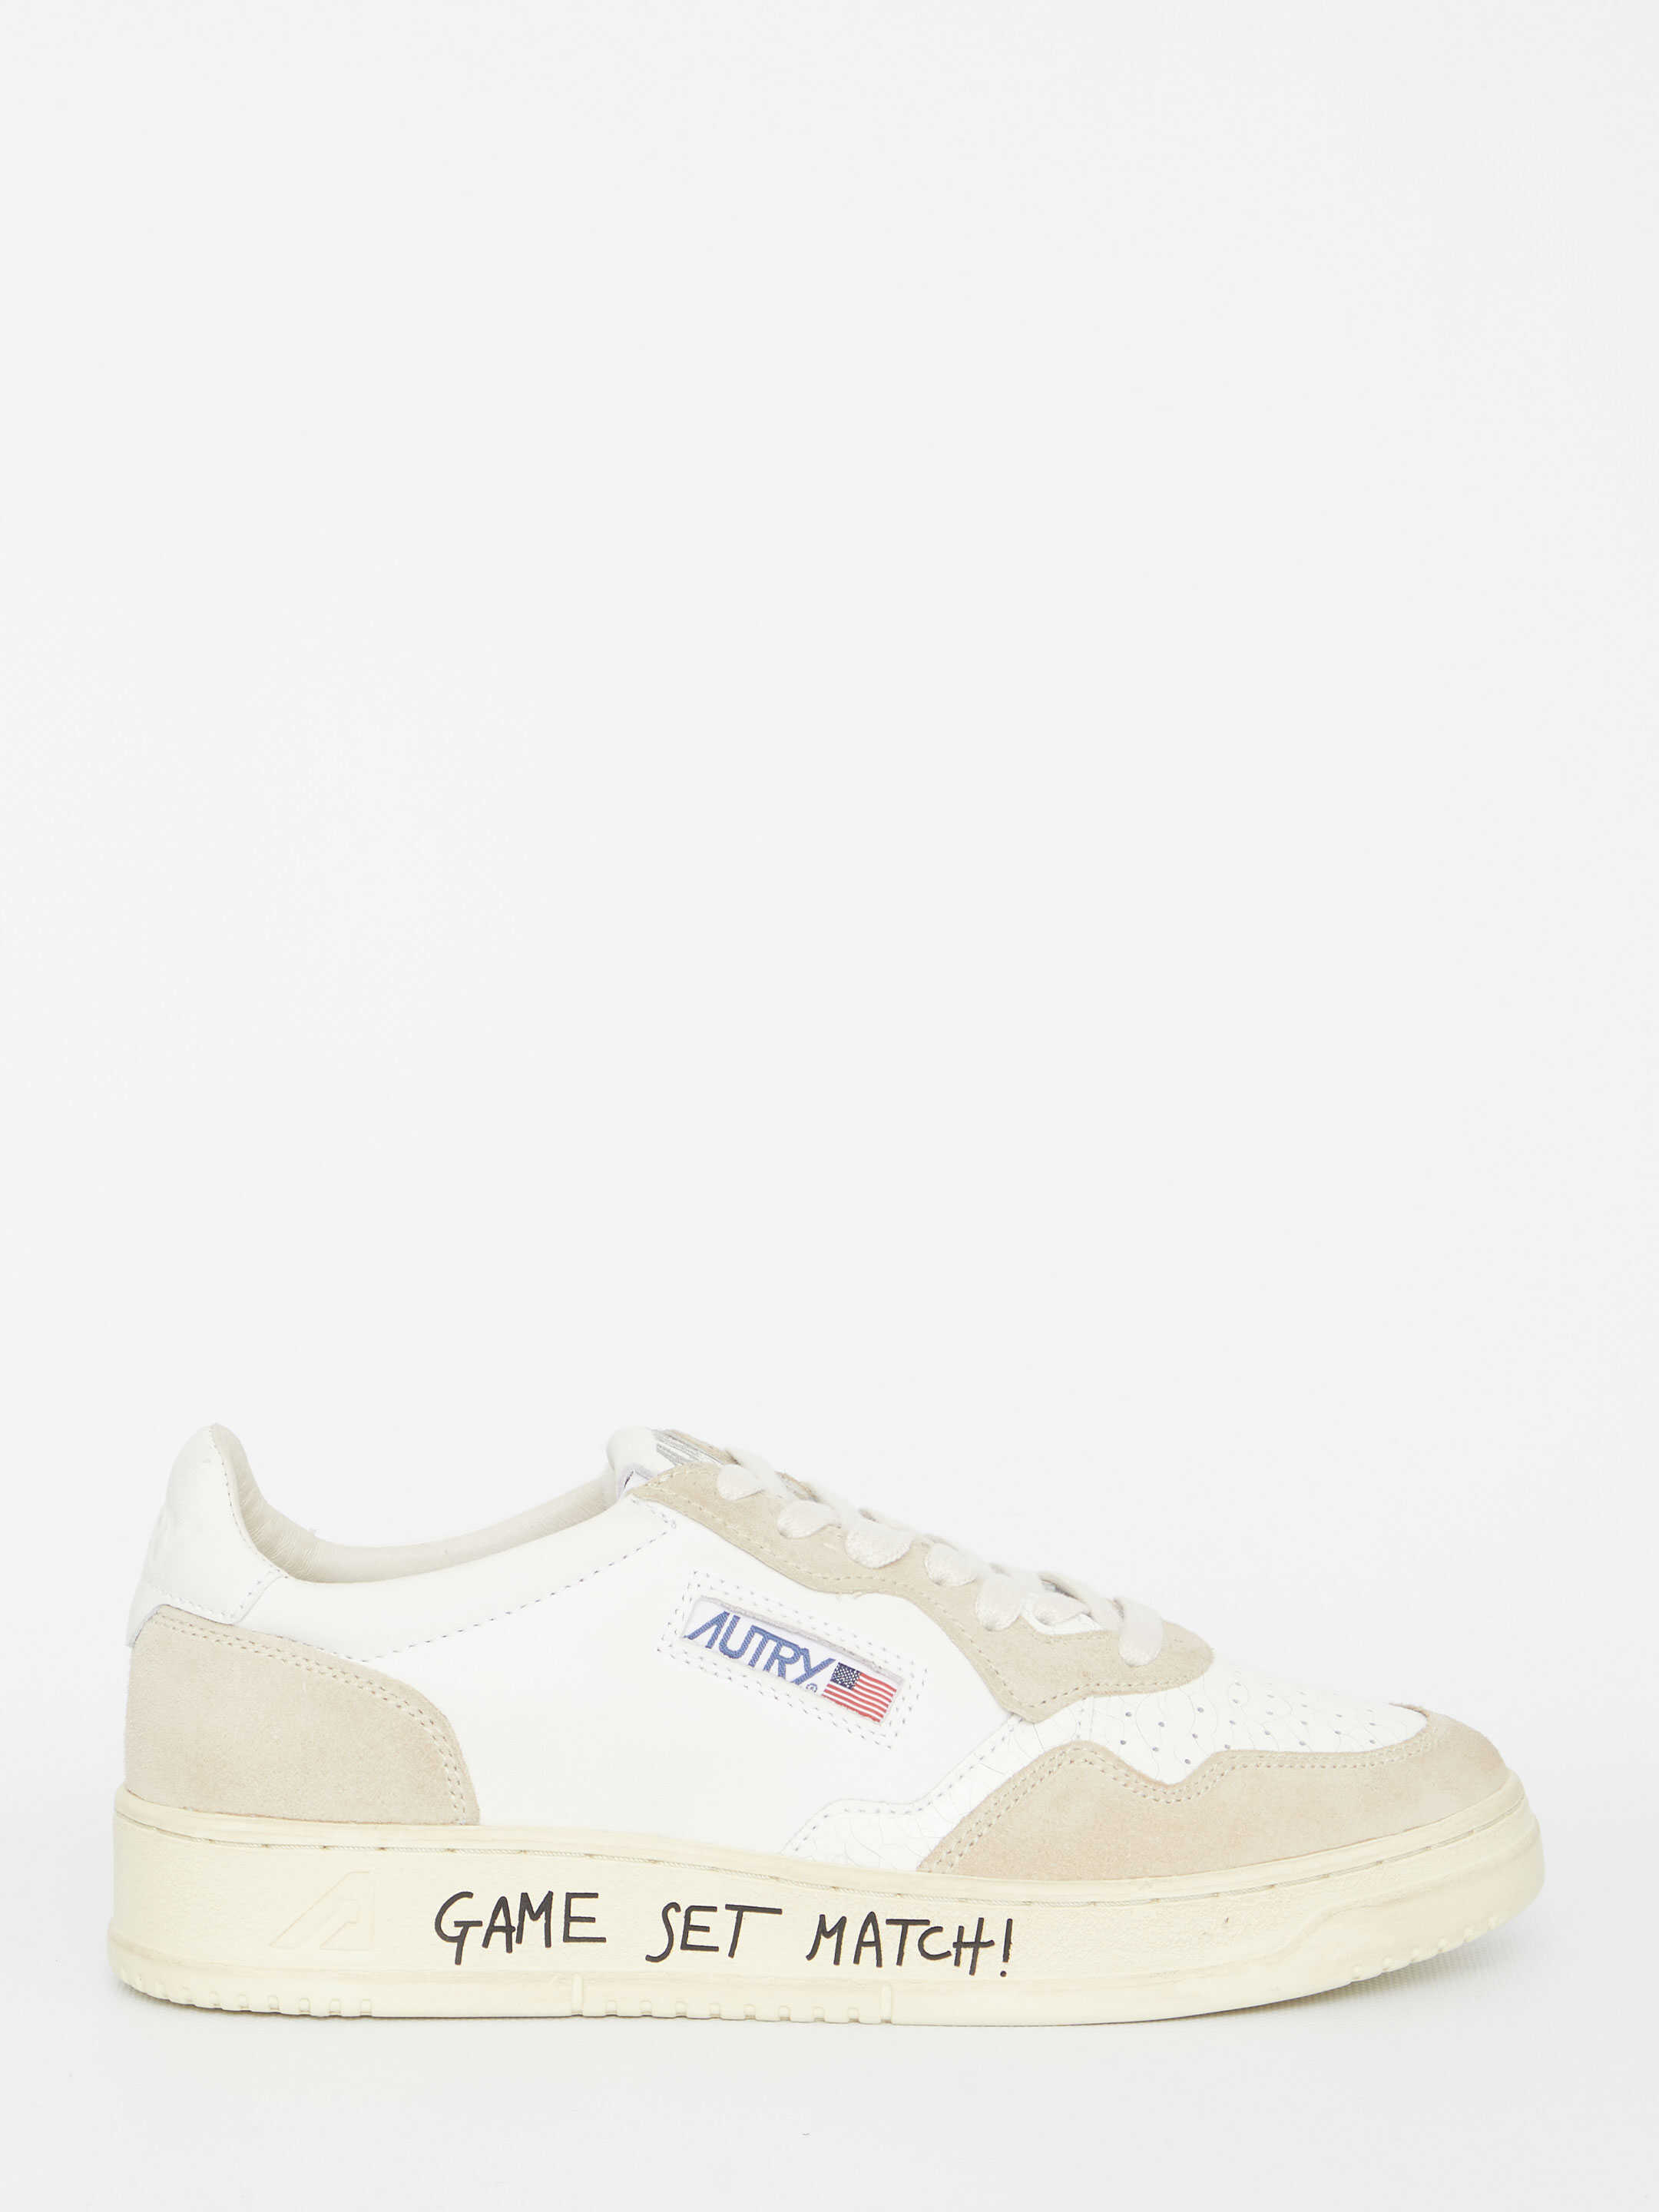 AUTRY Game Set Match Sneakers WHITE image9